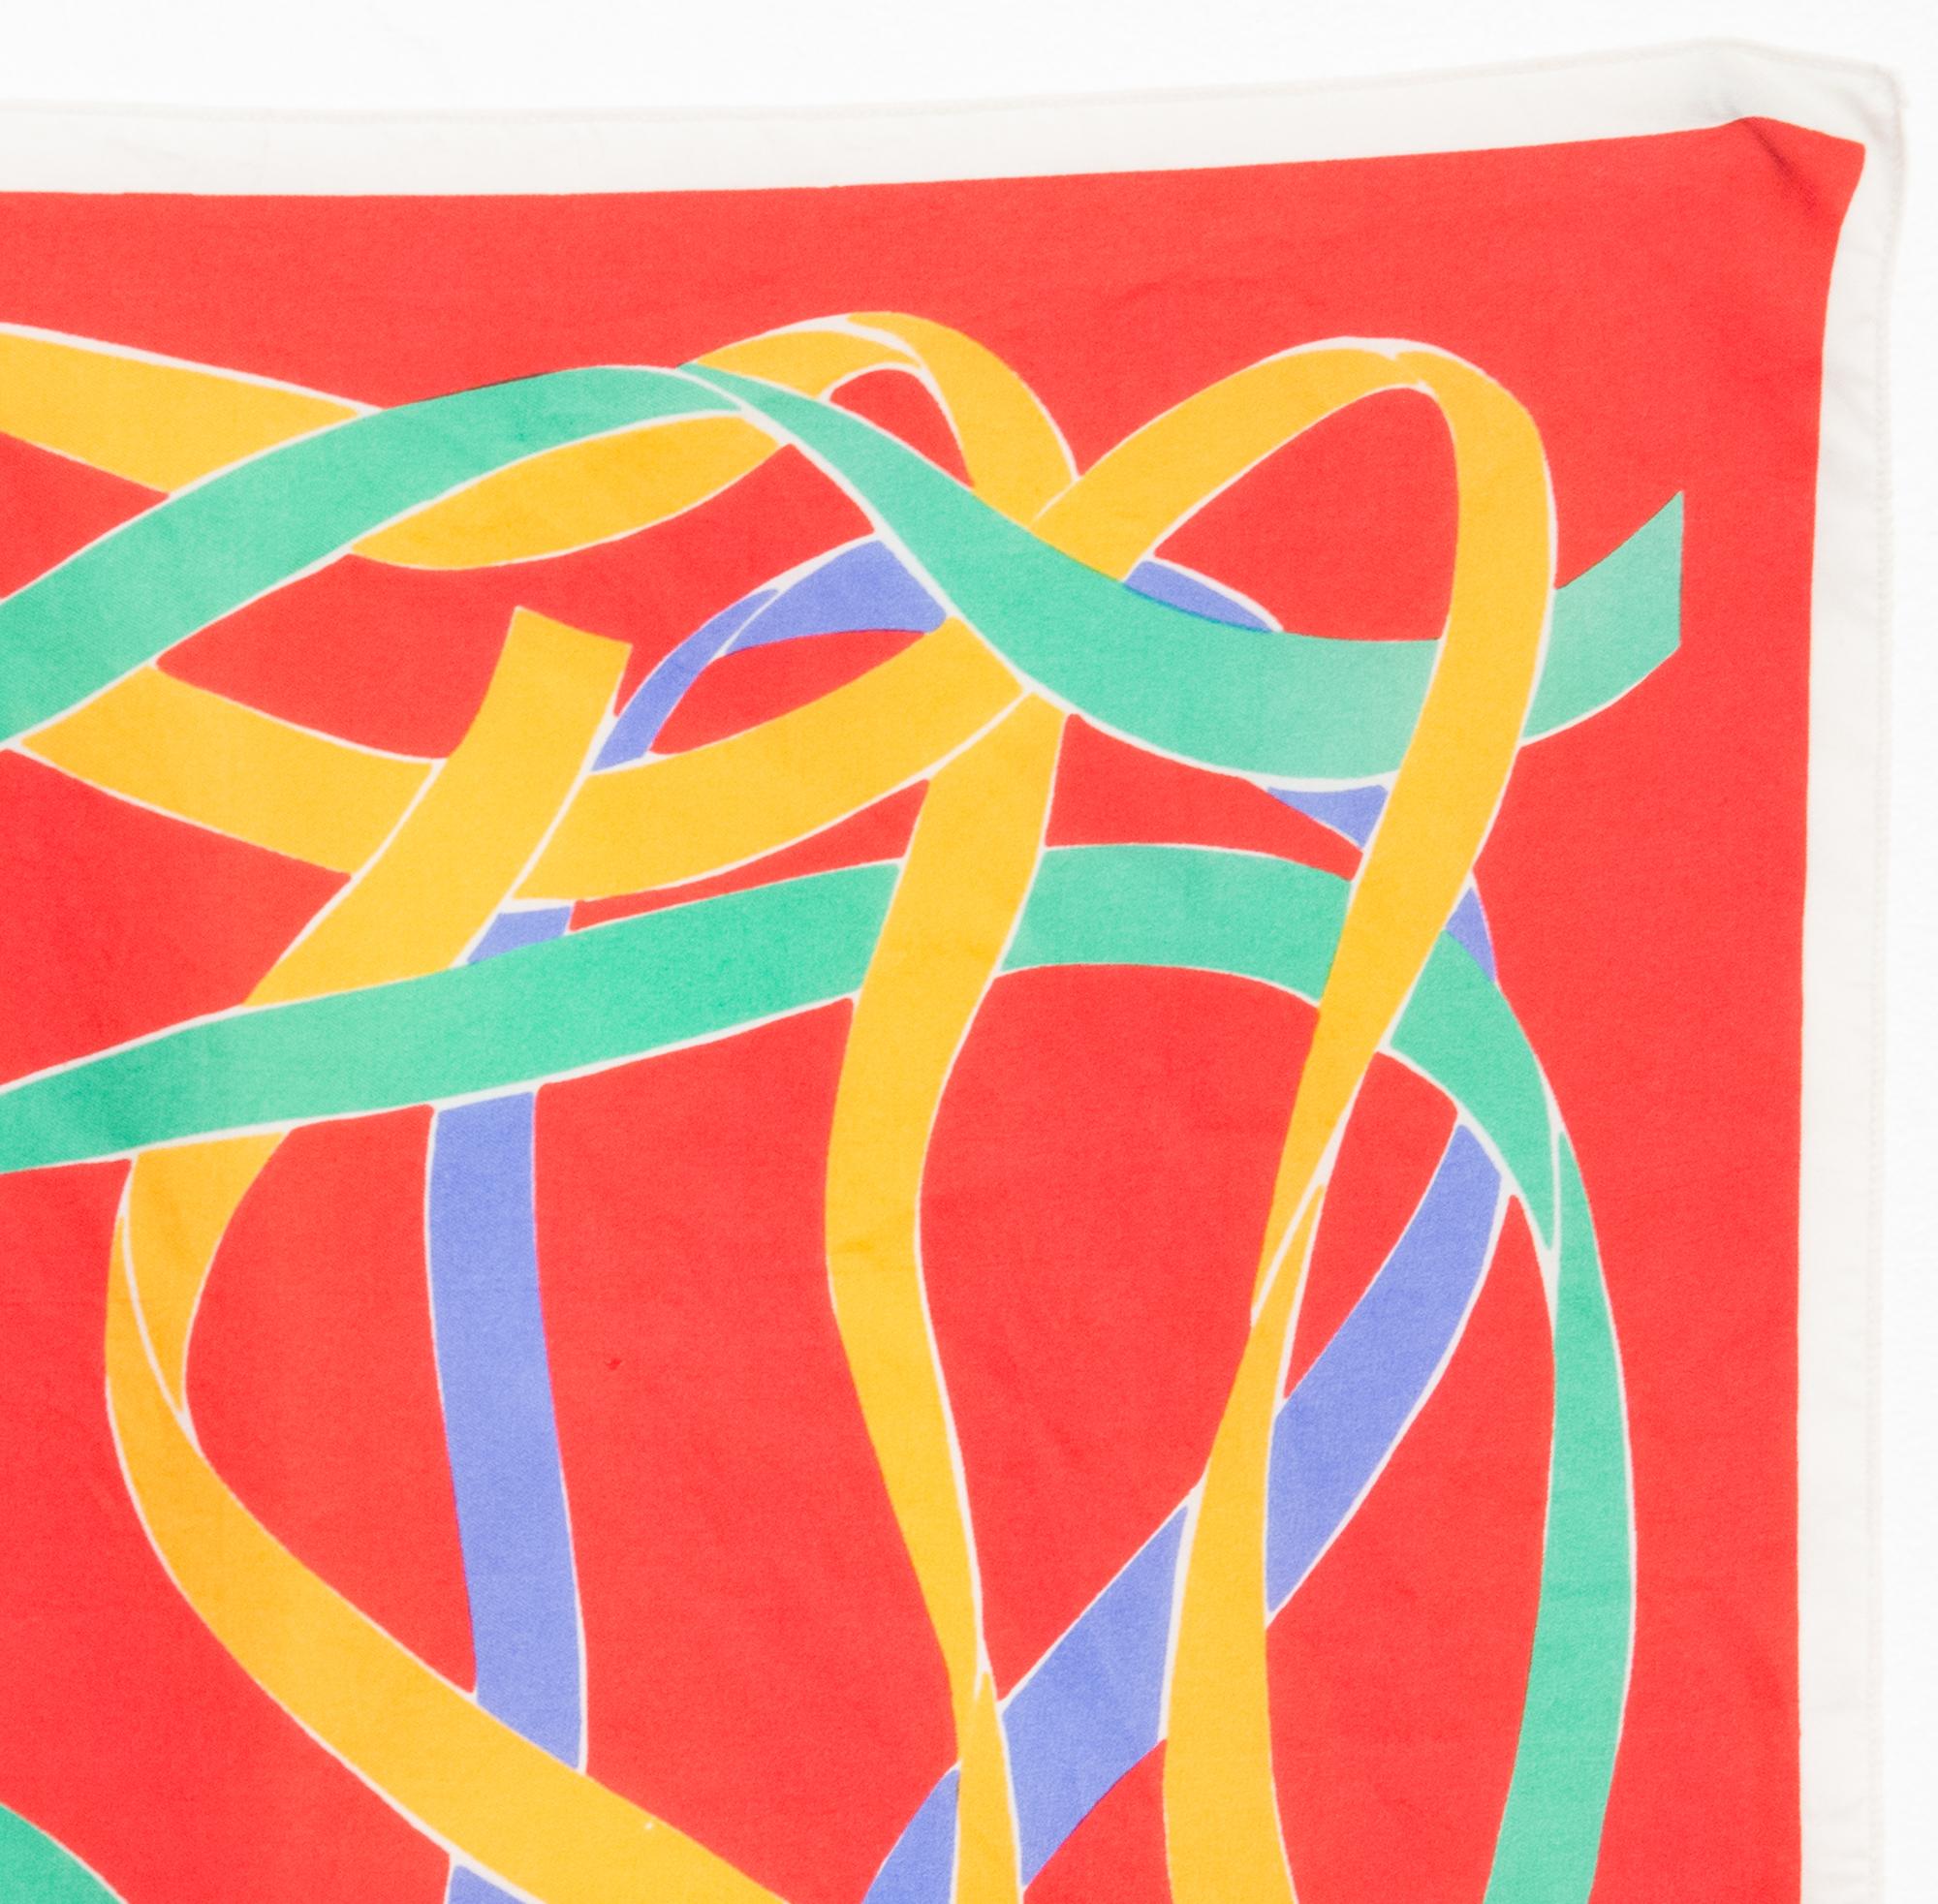  Yves Saint Laurent YSL Red Ribbons Tokyo 1990 Silk Scarf In Good Condition For Sale In Paris, FR